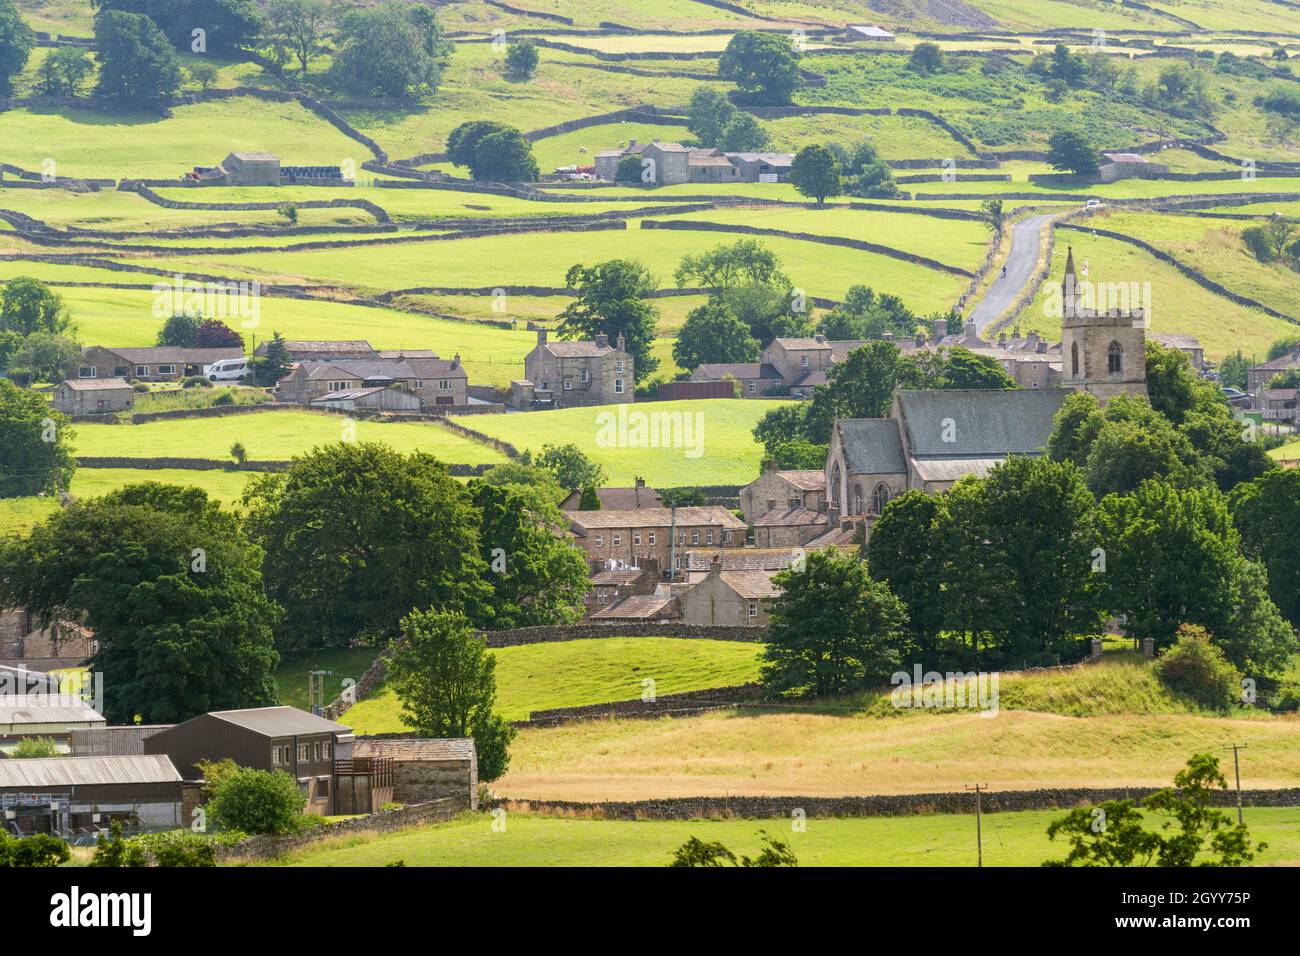 Hawes market town in upper Wensleydale, The Yorkshire Dales, England. Stock Photo